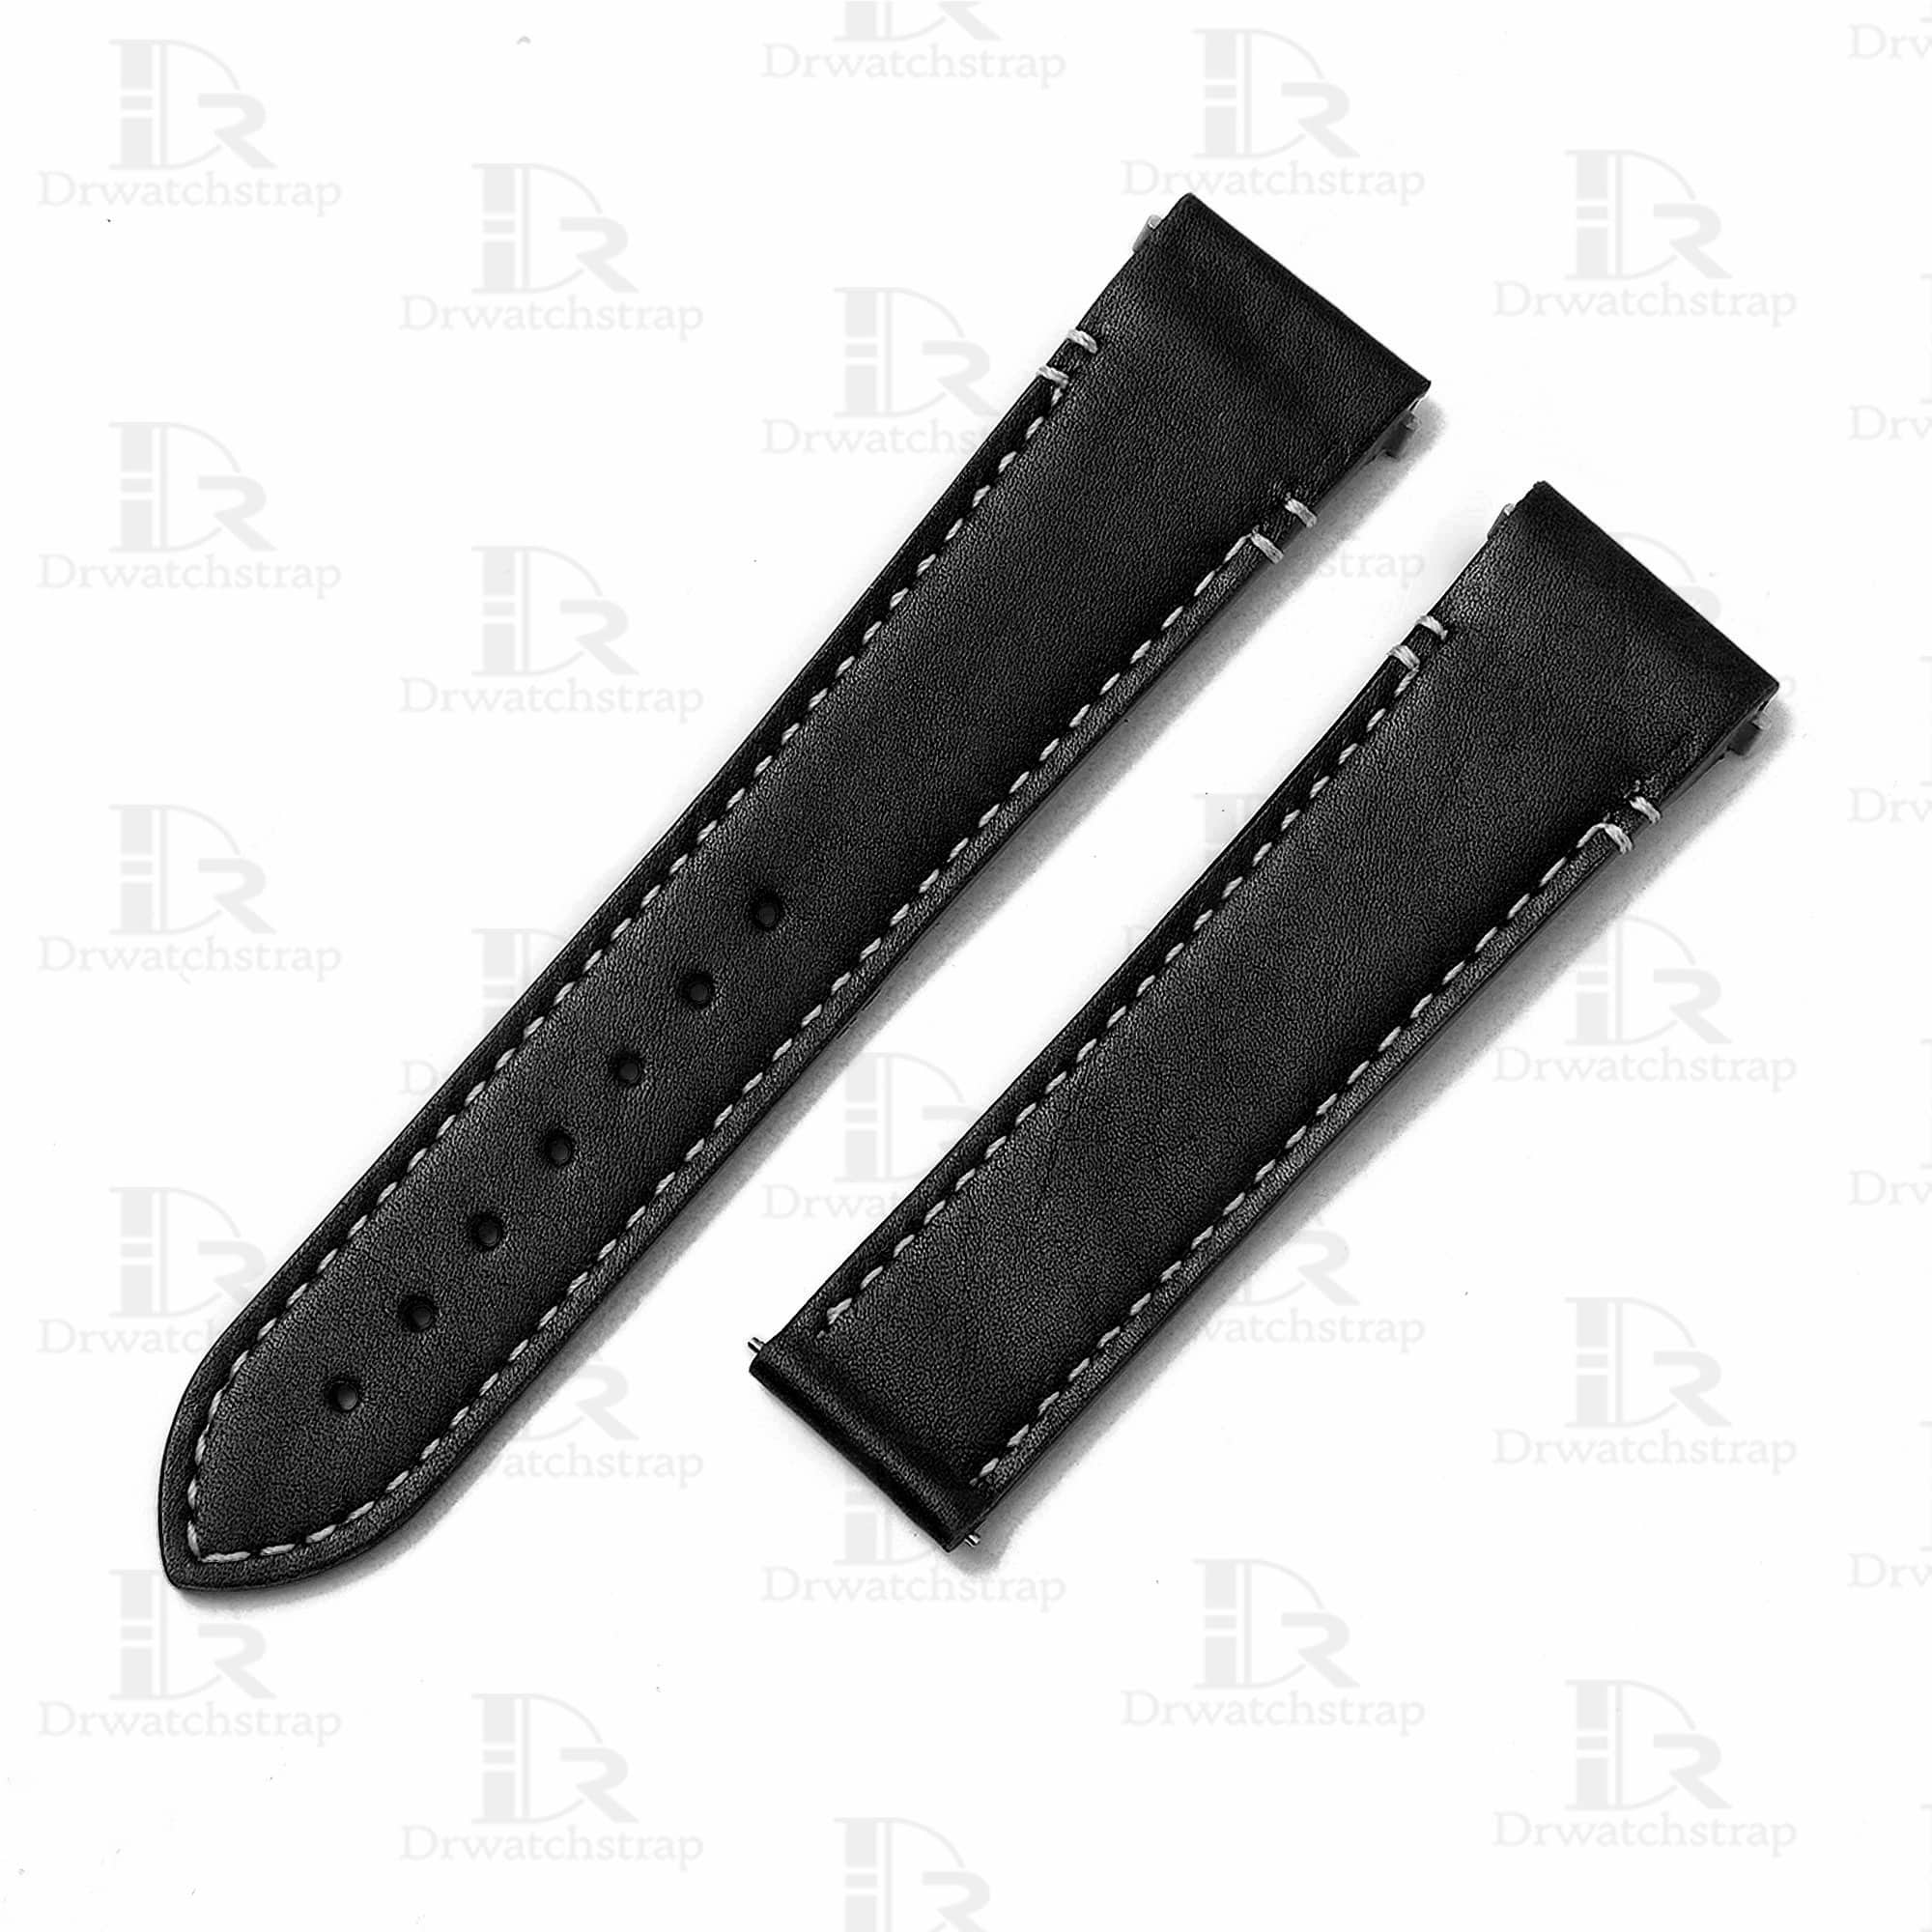 NEW Cartier Santos quickswitch black leather replacement watch band for sale custom handmade